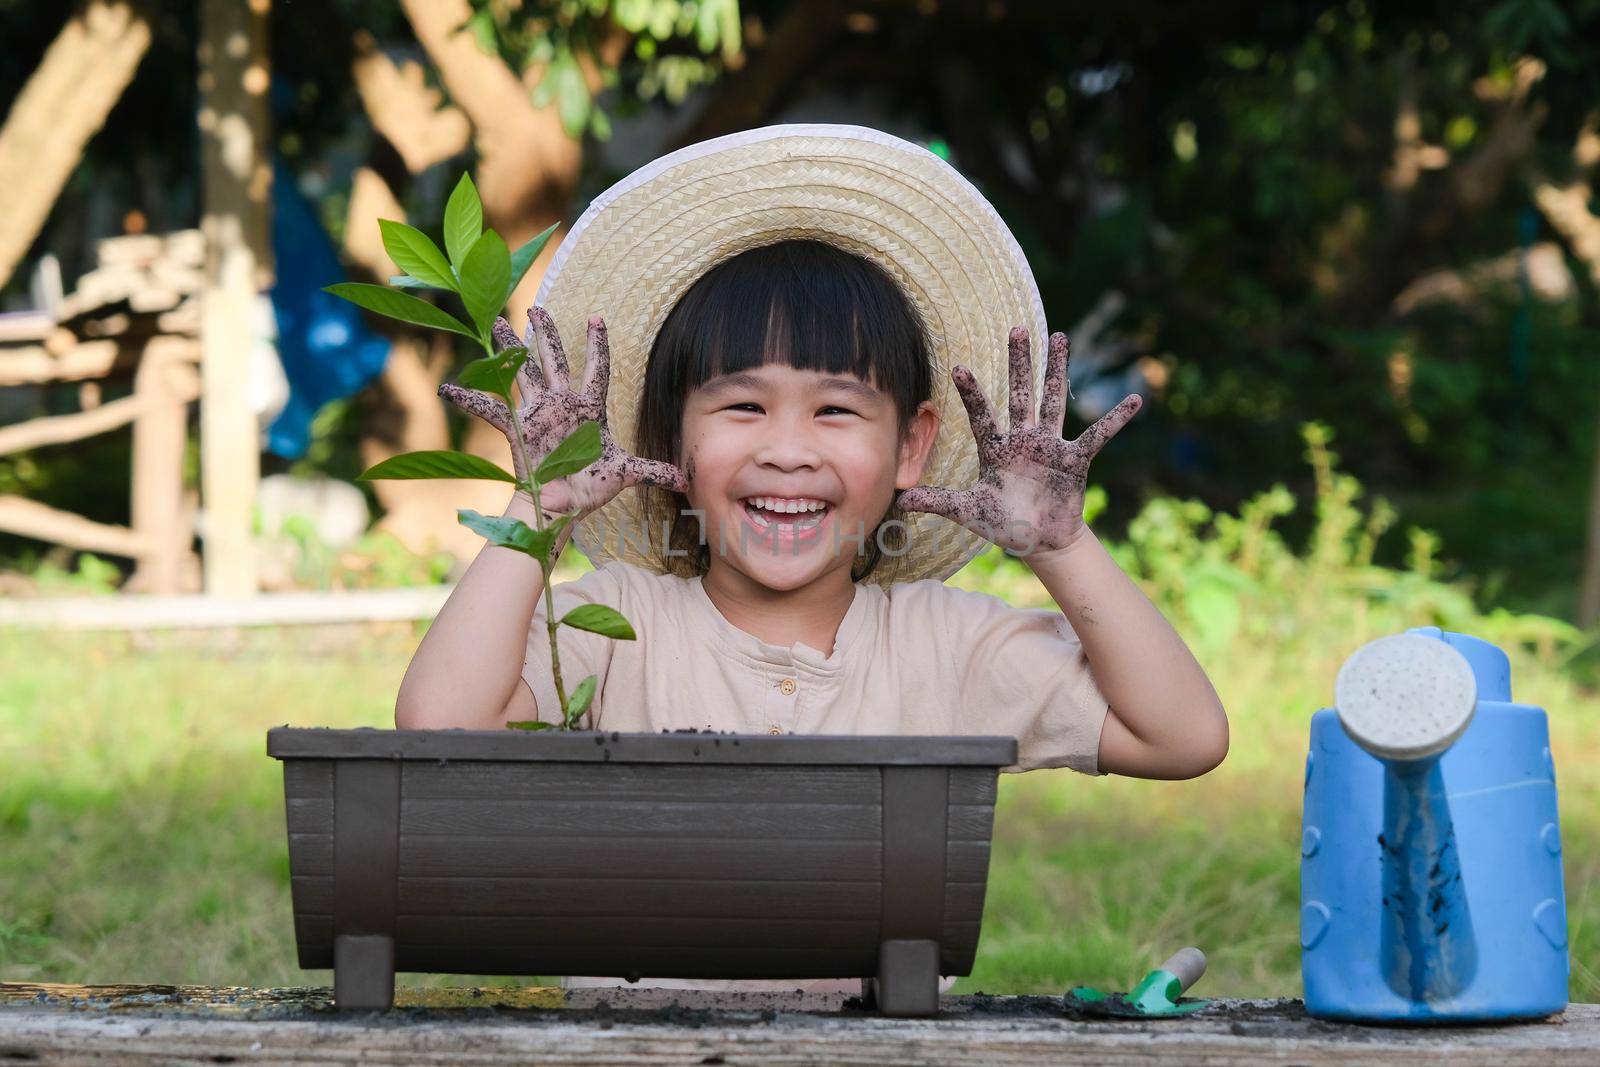 Little girl wearing a hat helps her mother in the garden, a little gardener. Cute girl planting flowers in pots. Cute little girl smiles and shows off her dirty hands in the backyard.